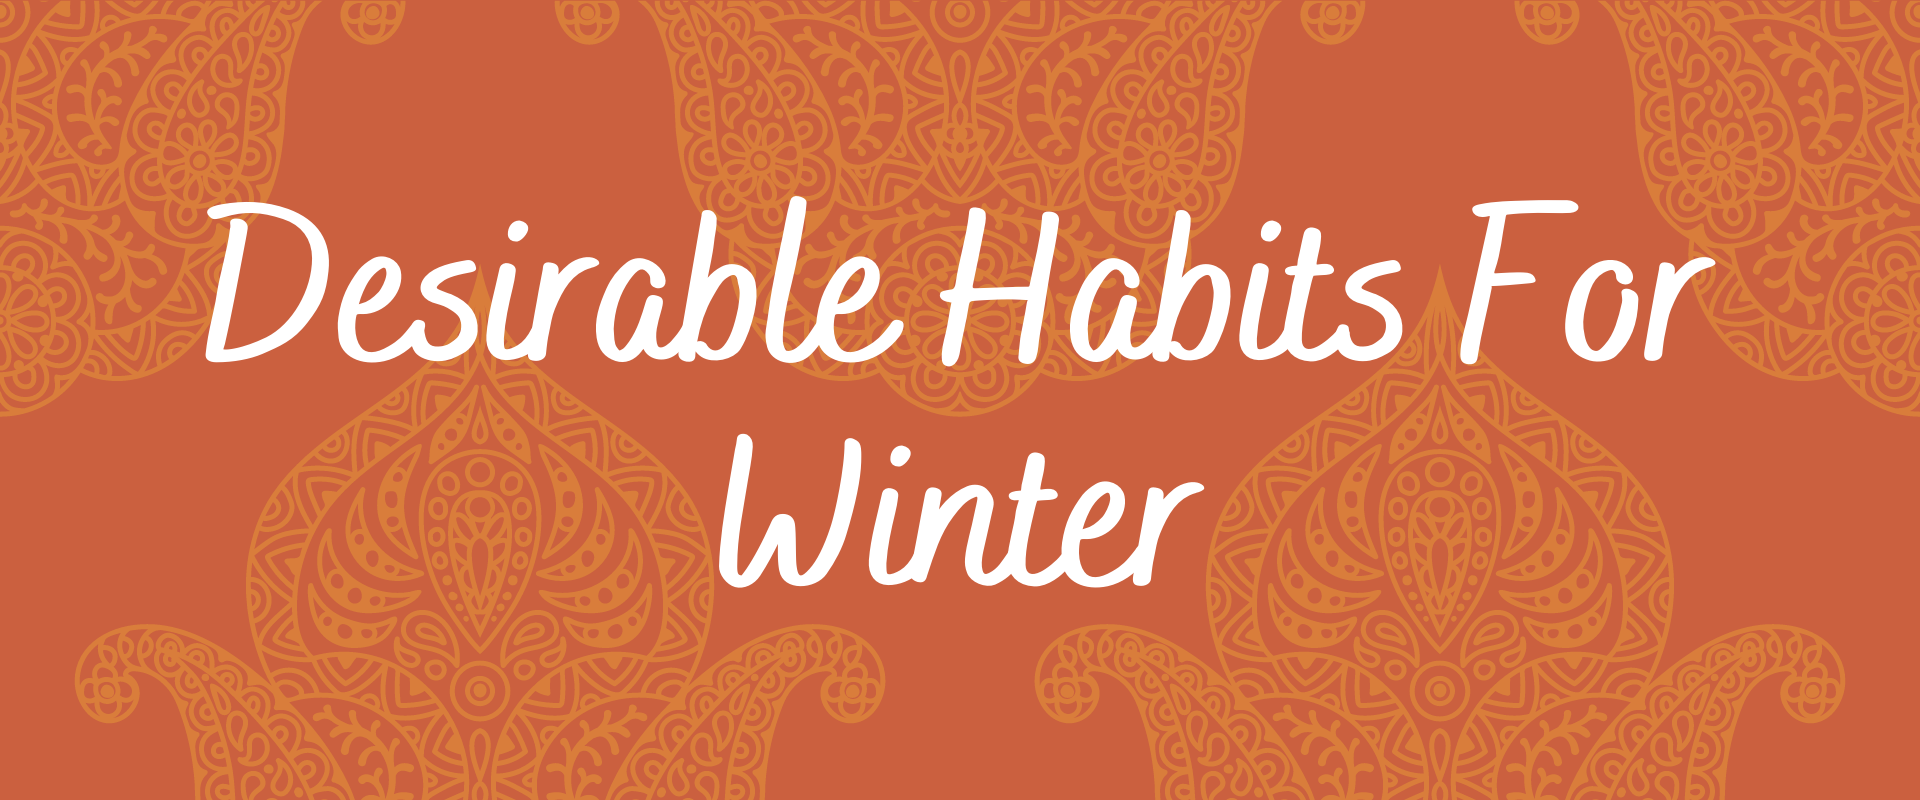 Desirable Habits For Winter